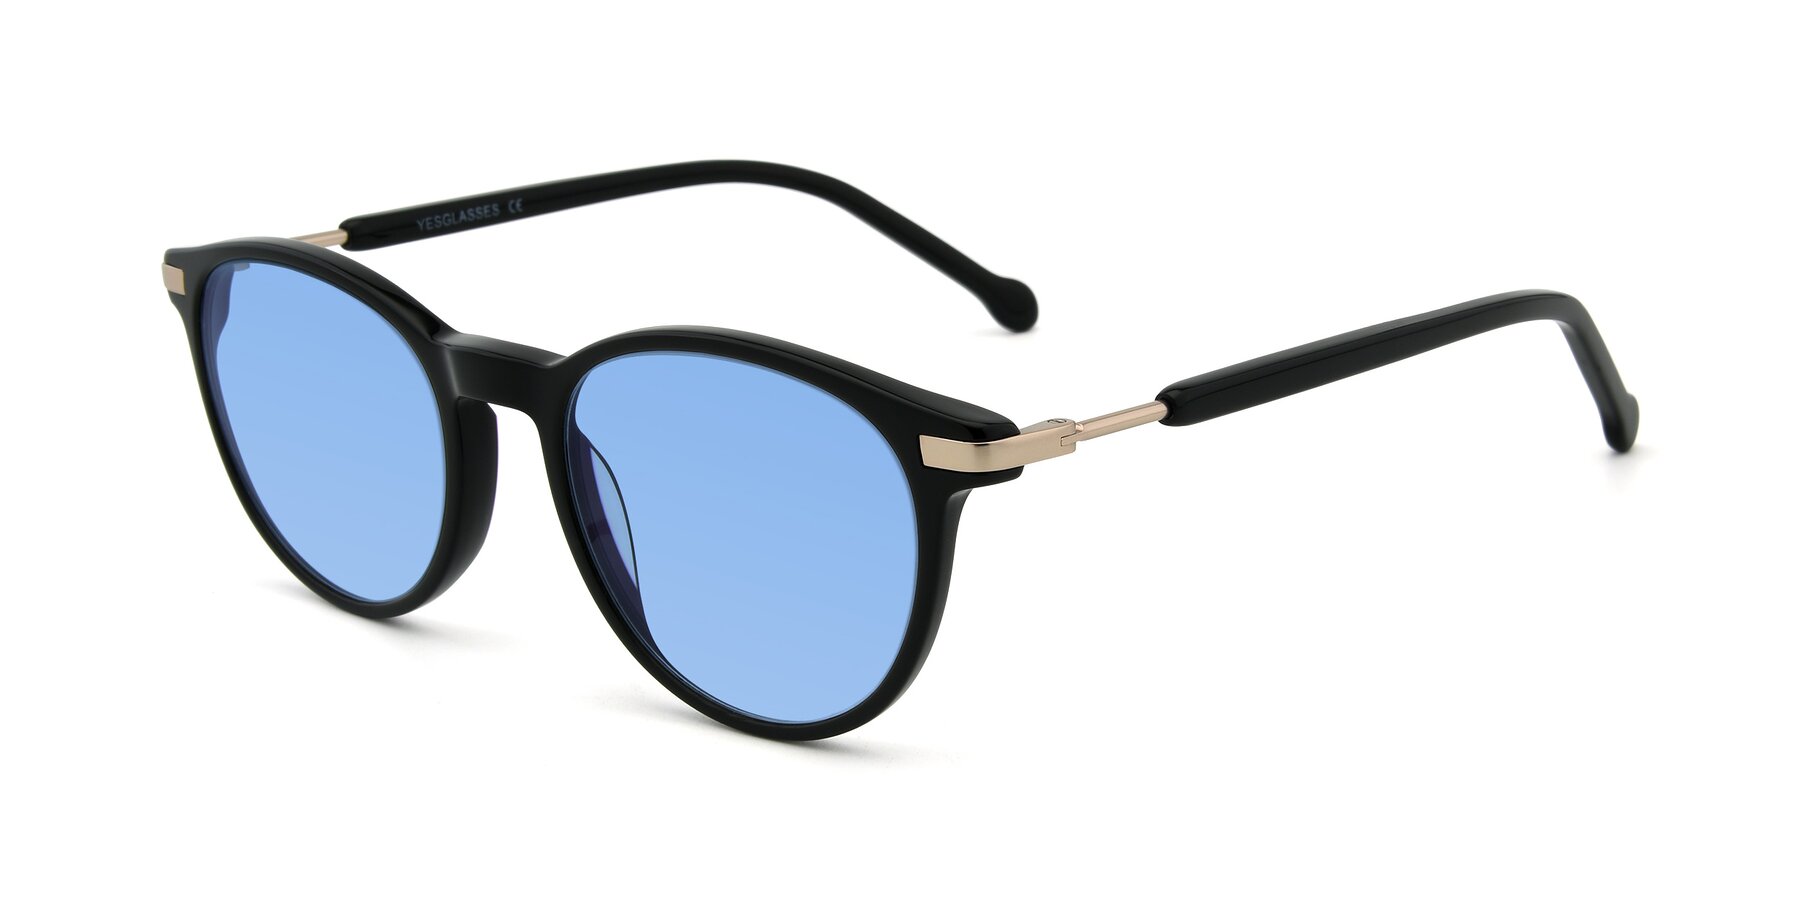 Angle of 17429 in Black with Medium Blue Tinted Lenses